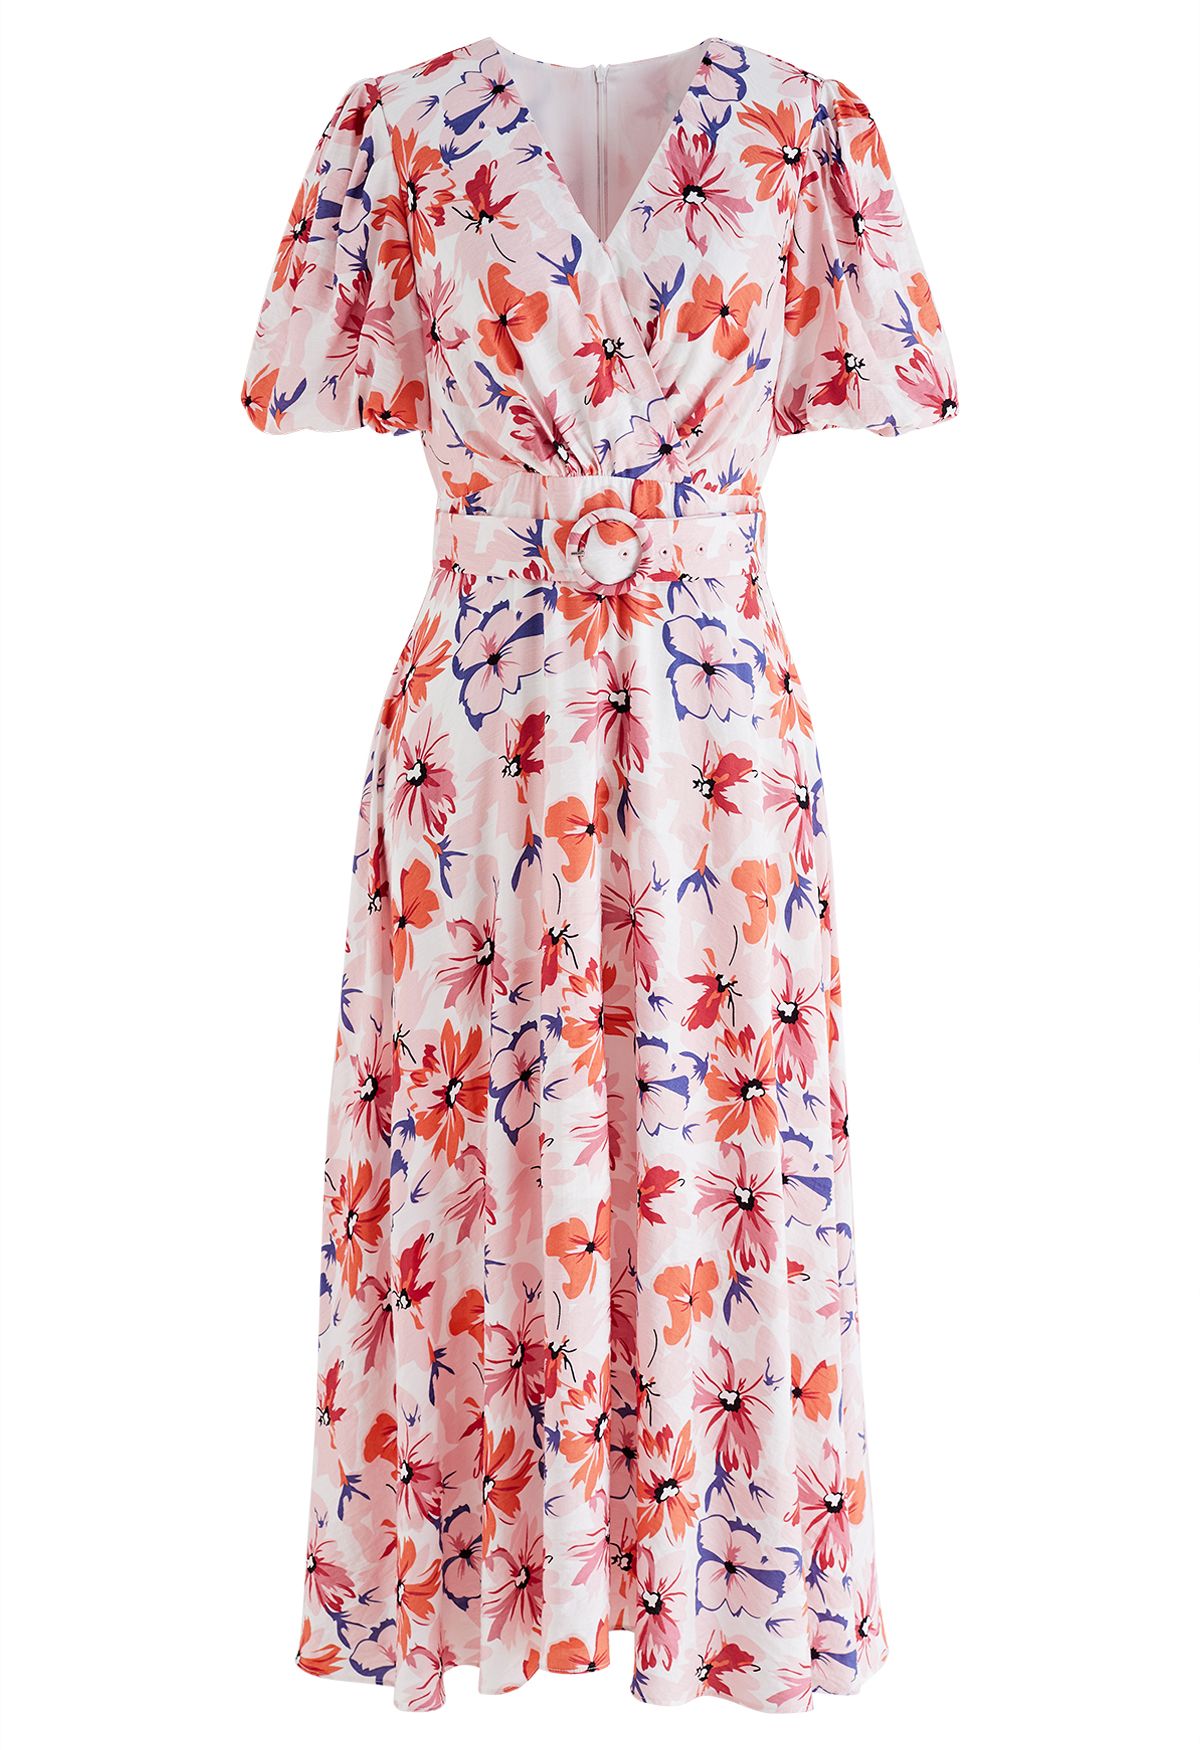 Lively Floral Print Belted Wrap Dress - Retro, Indie and Unique Fashion